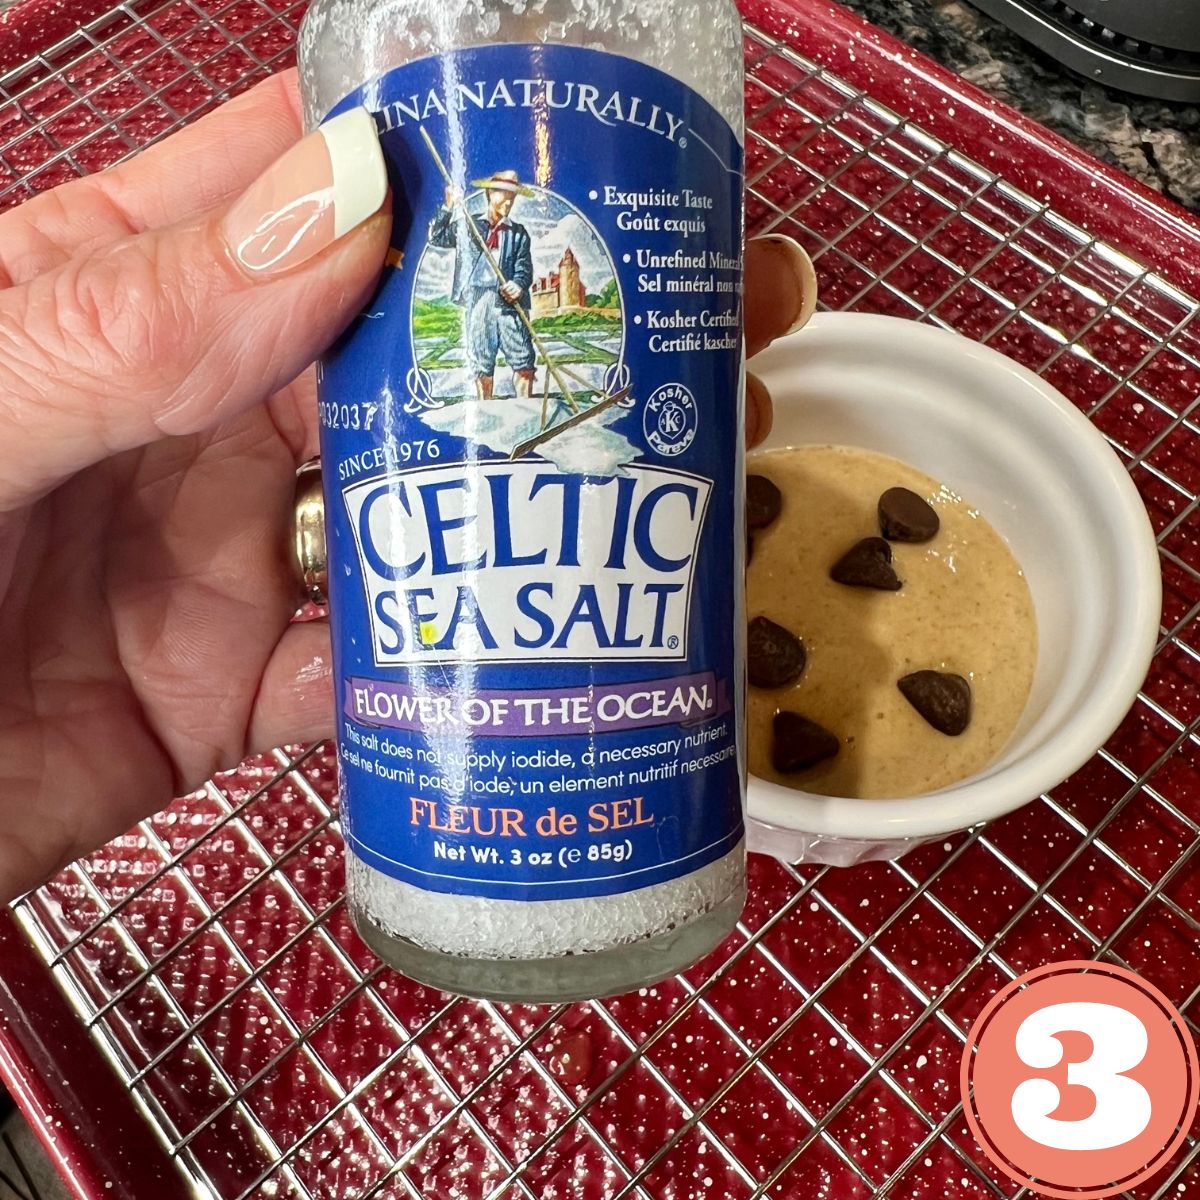 A hand holding a jar of Celtic sea salt over cookie baked oats in a white ramekin on a red baking pan